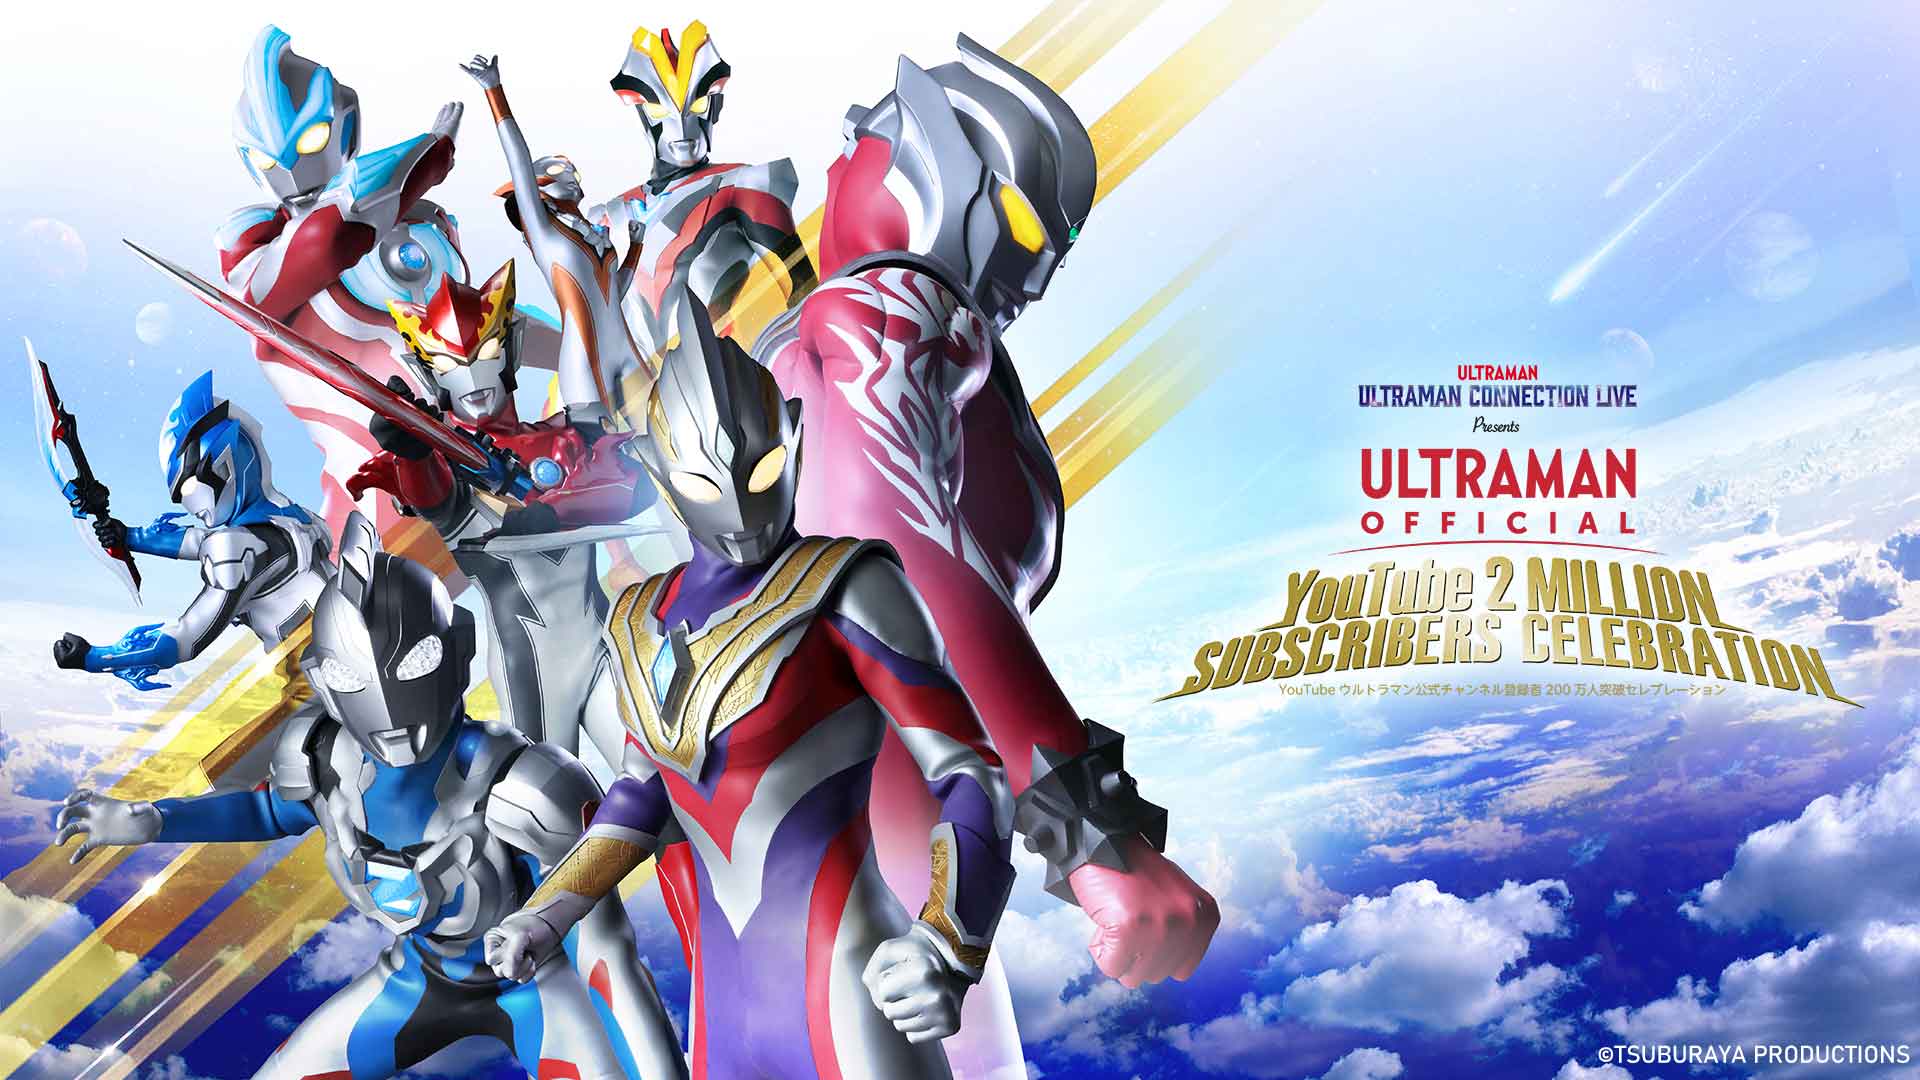 Special Livestream Event! Ultraman Official YouTube Channel: 2 Million Subscriber Celebration!